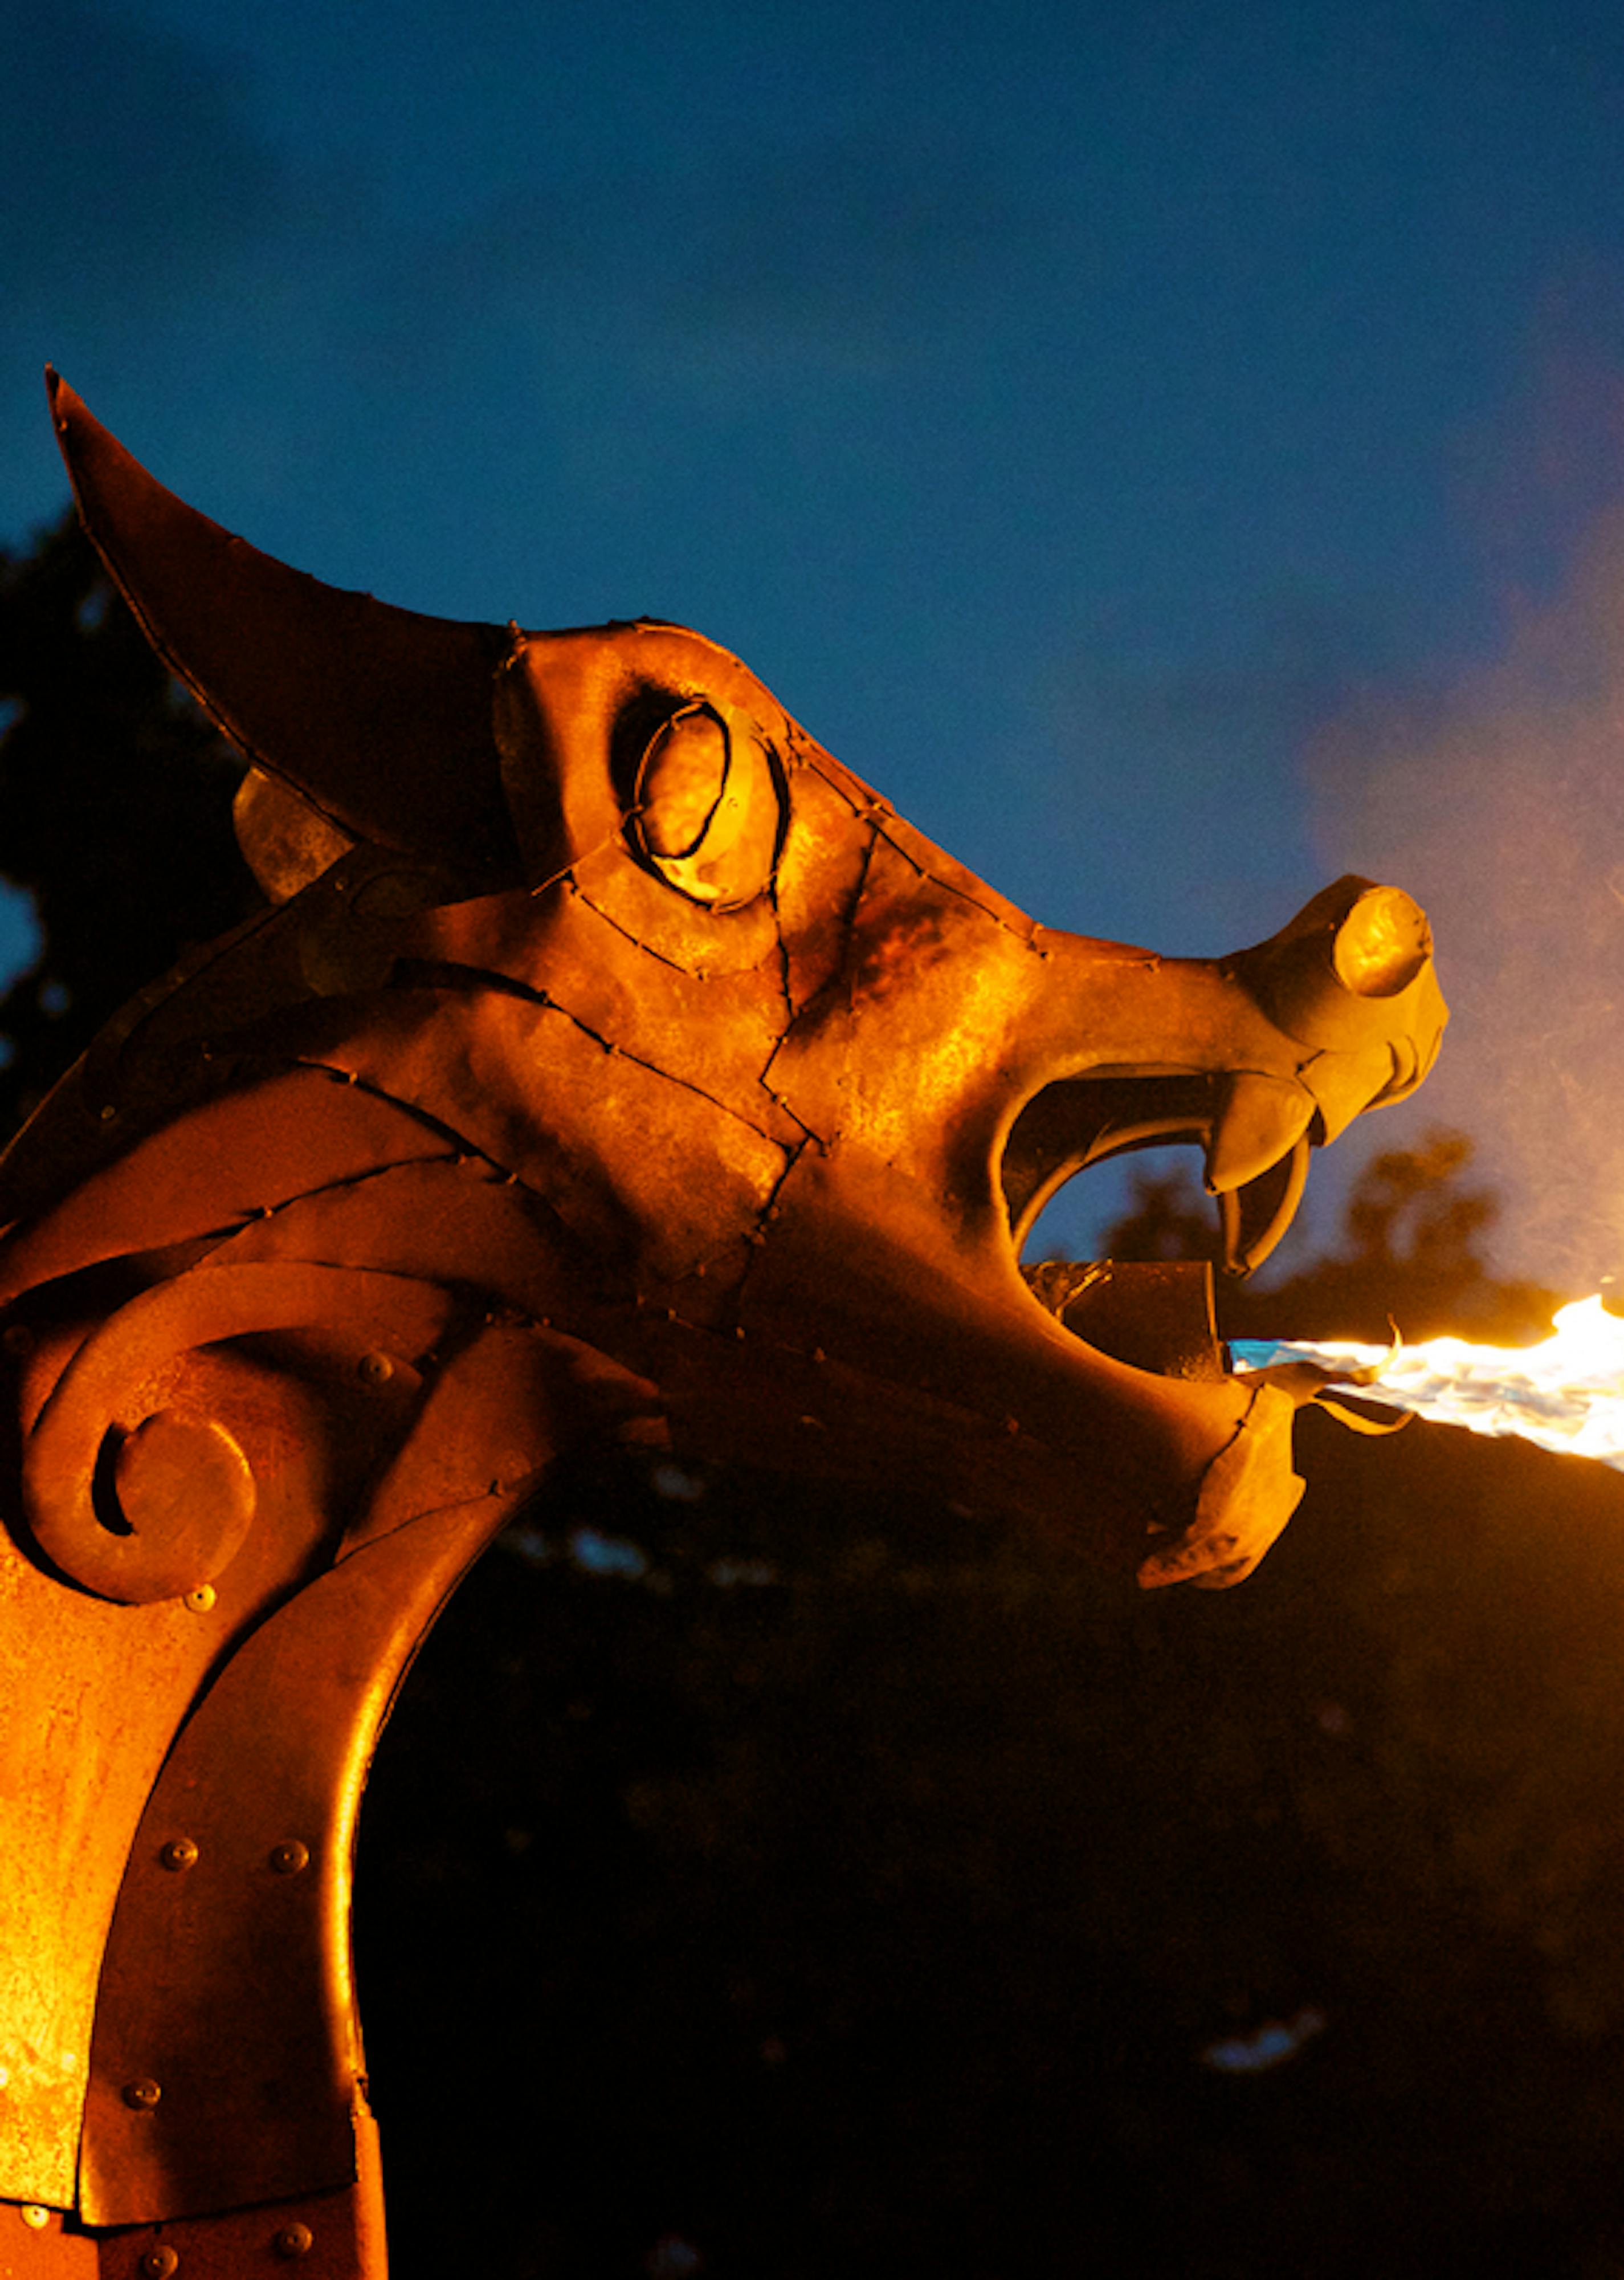 The dragon head from the front of a ship breathing fire